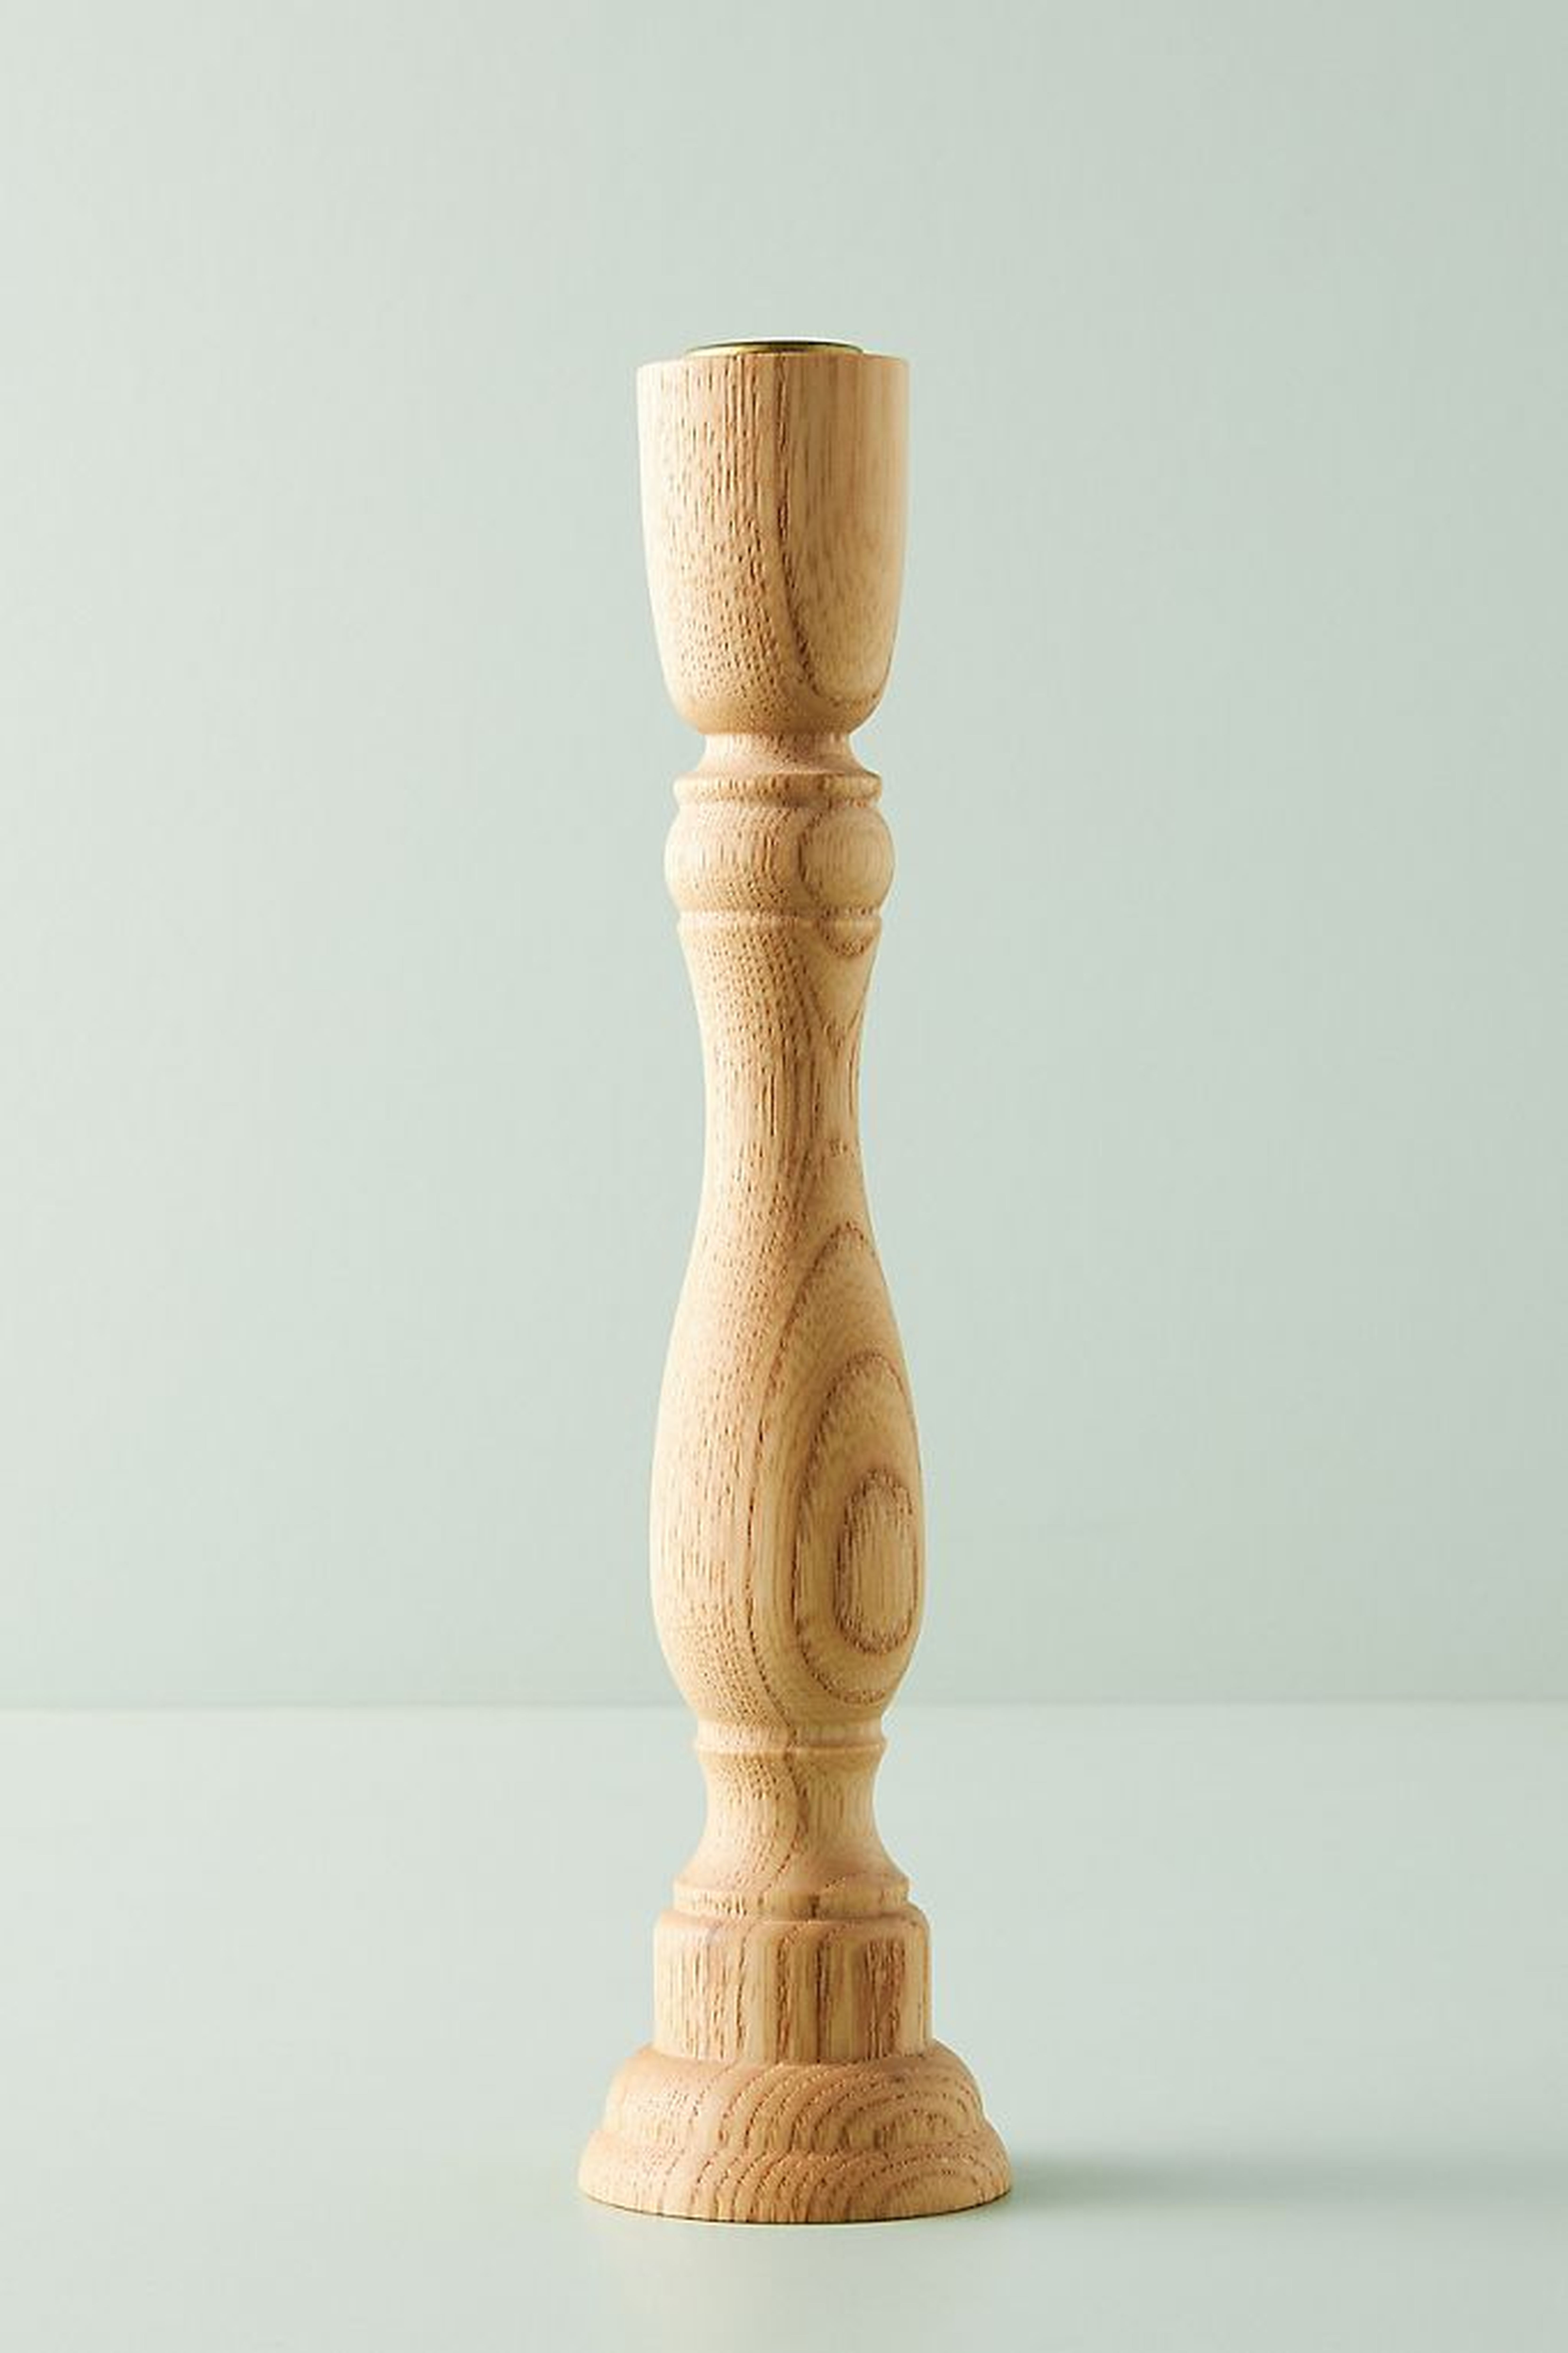 Sawyer Wood Taper Candle Holder - Anthropologie